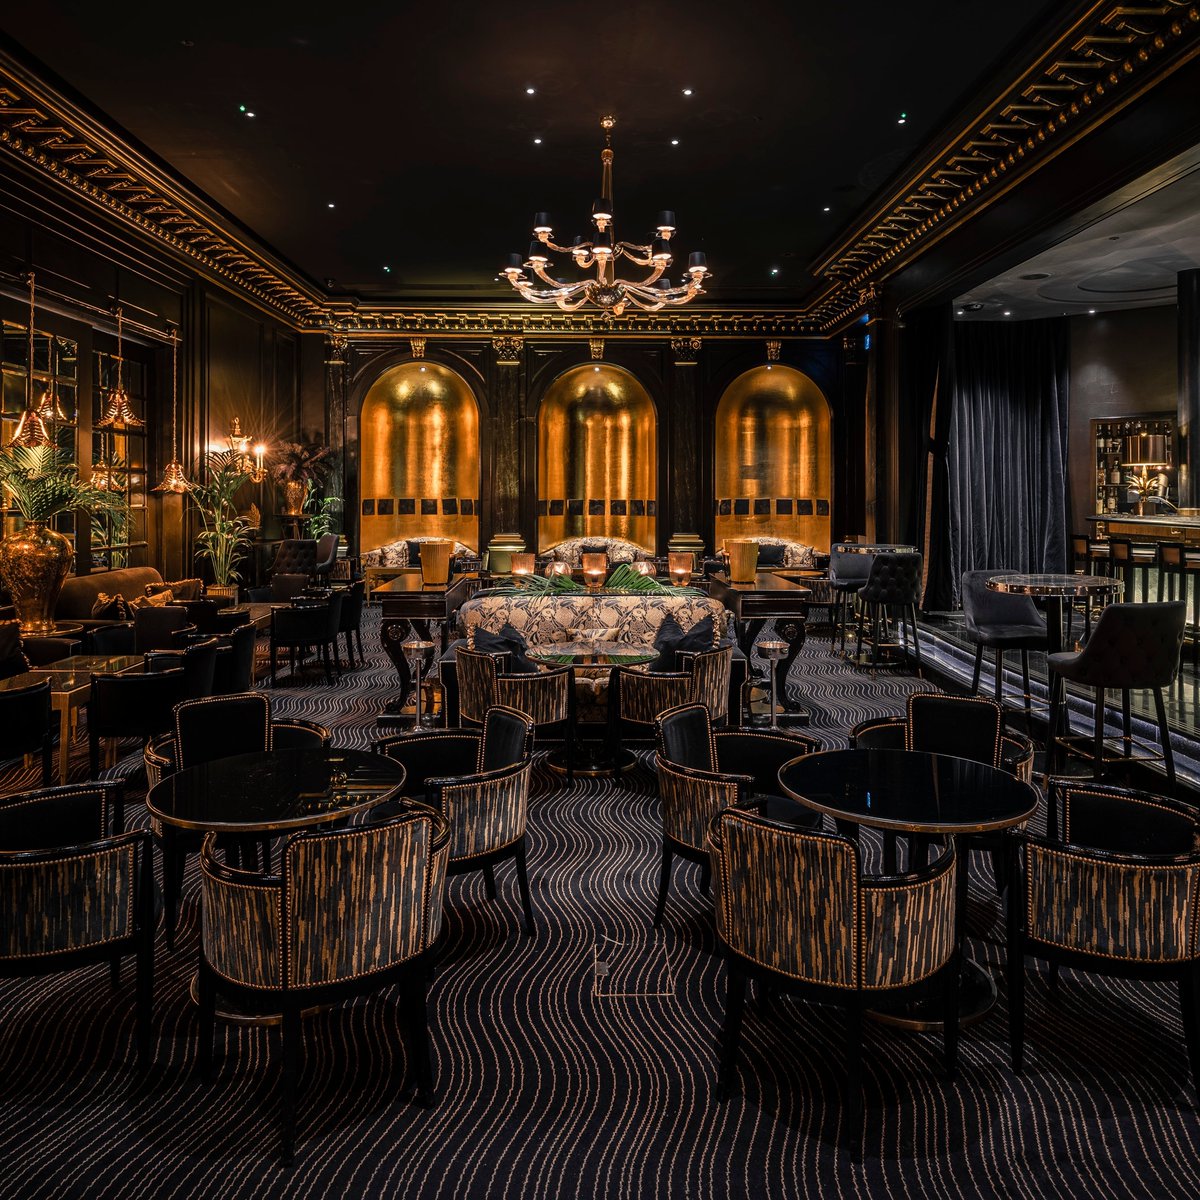 Cheers to the weekend 🍸⁠ ⁠ Elevate your Friday night with us at the Beaufort Bar, where opulence meets innovation, and cocktails become art. 💫⁠ ⁠ #BeaufortBar #TheSavoy #London #Londonbars #Londondrinks⁠